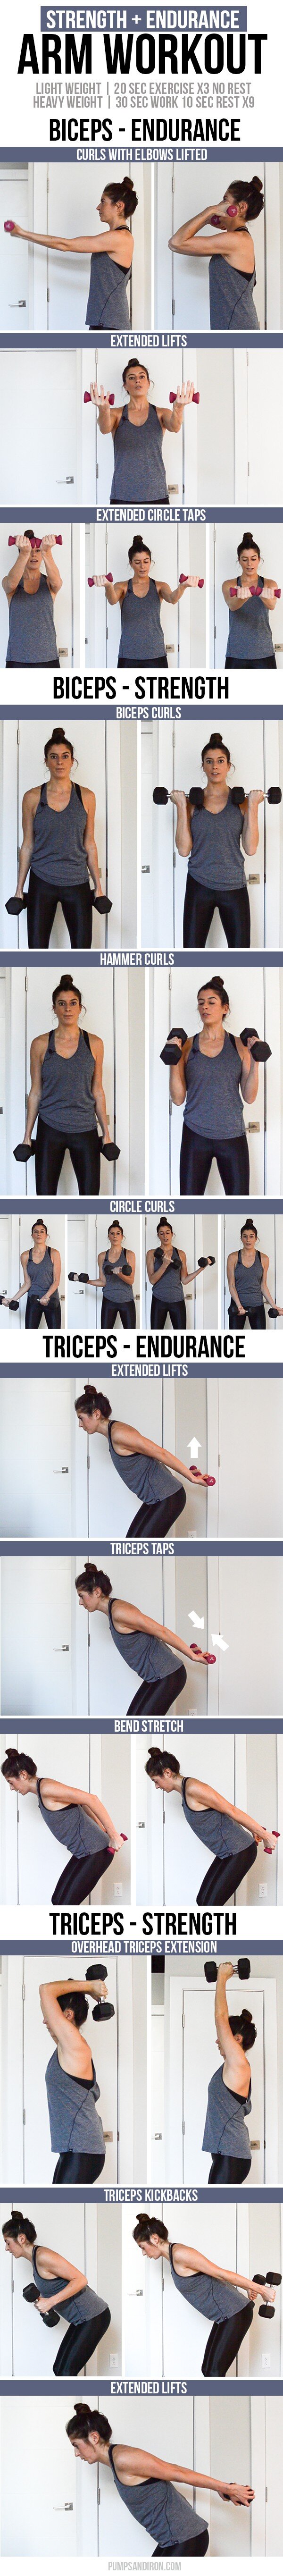 Endurance and Strength Arm Workout 